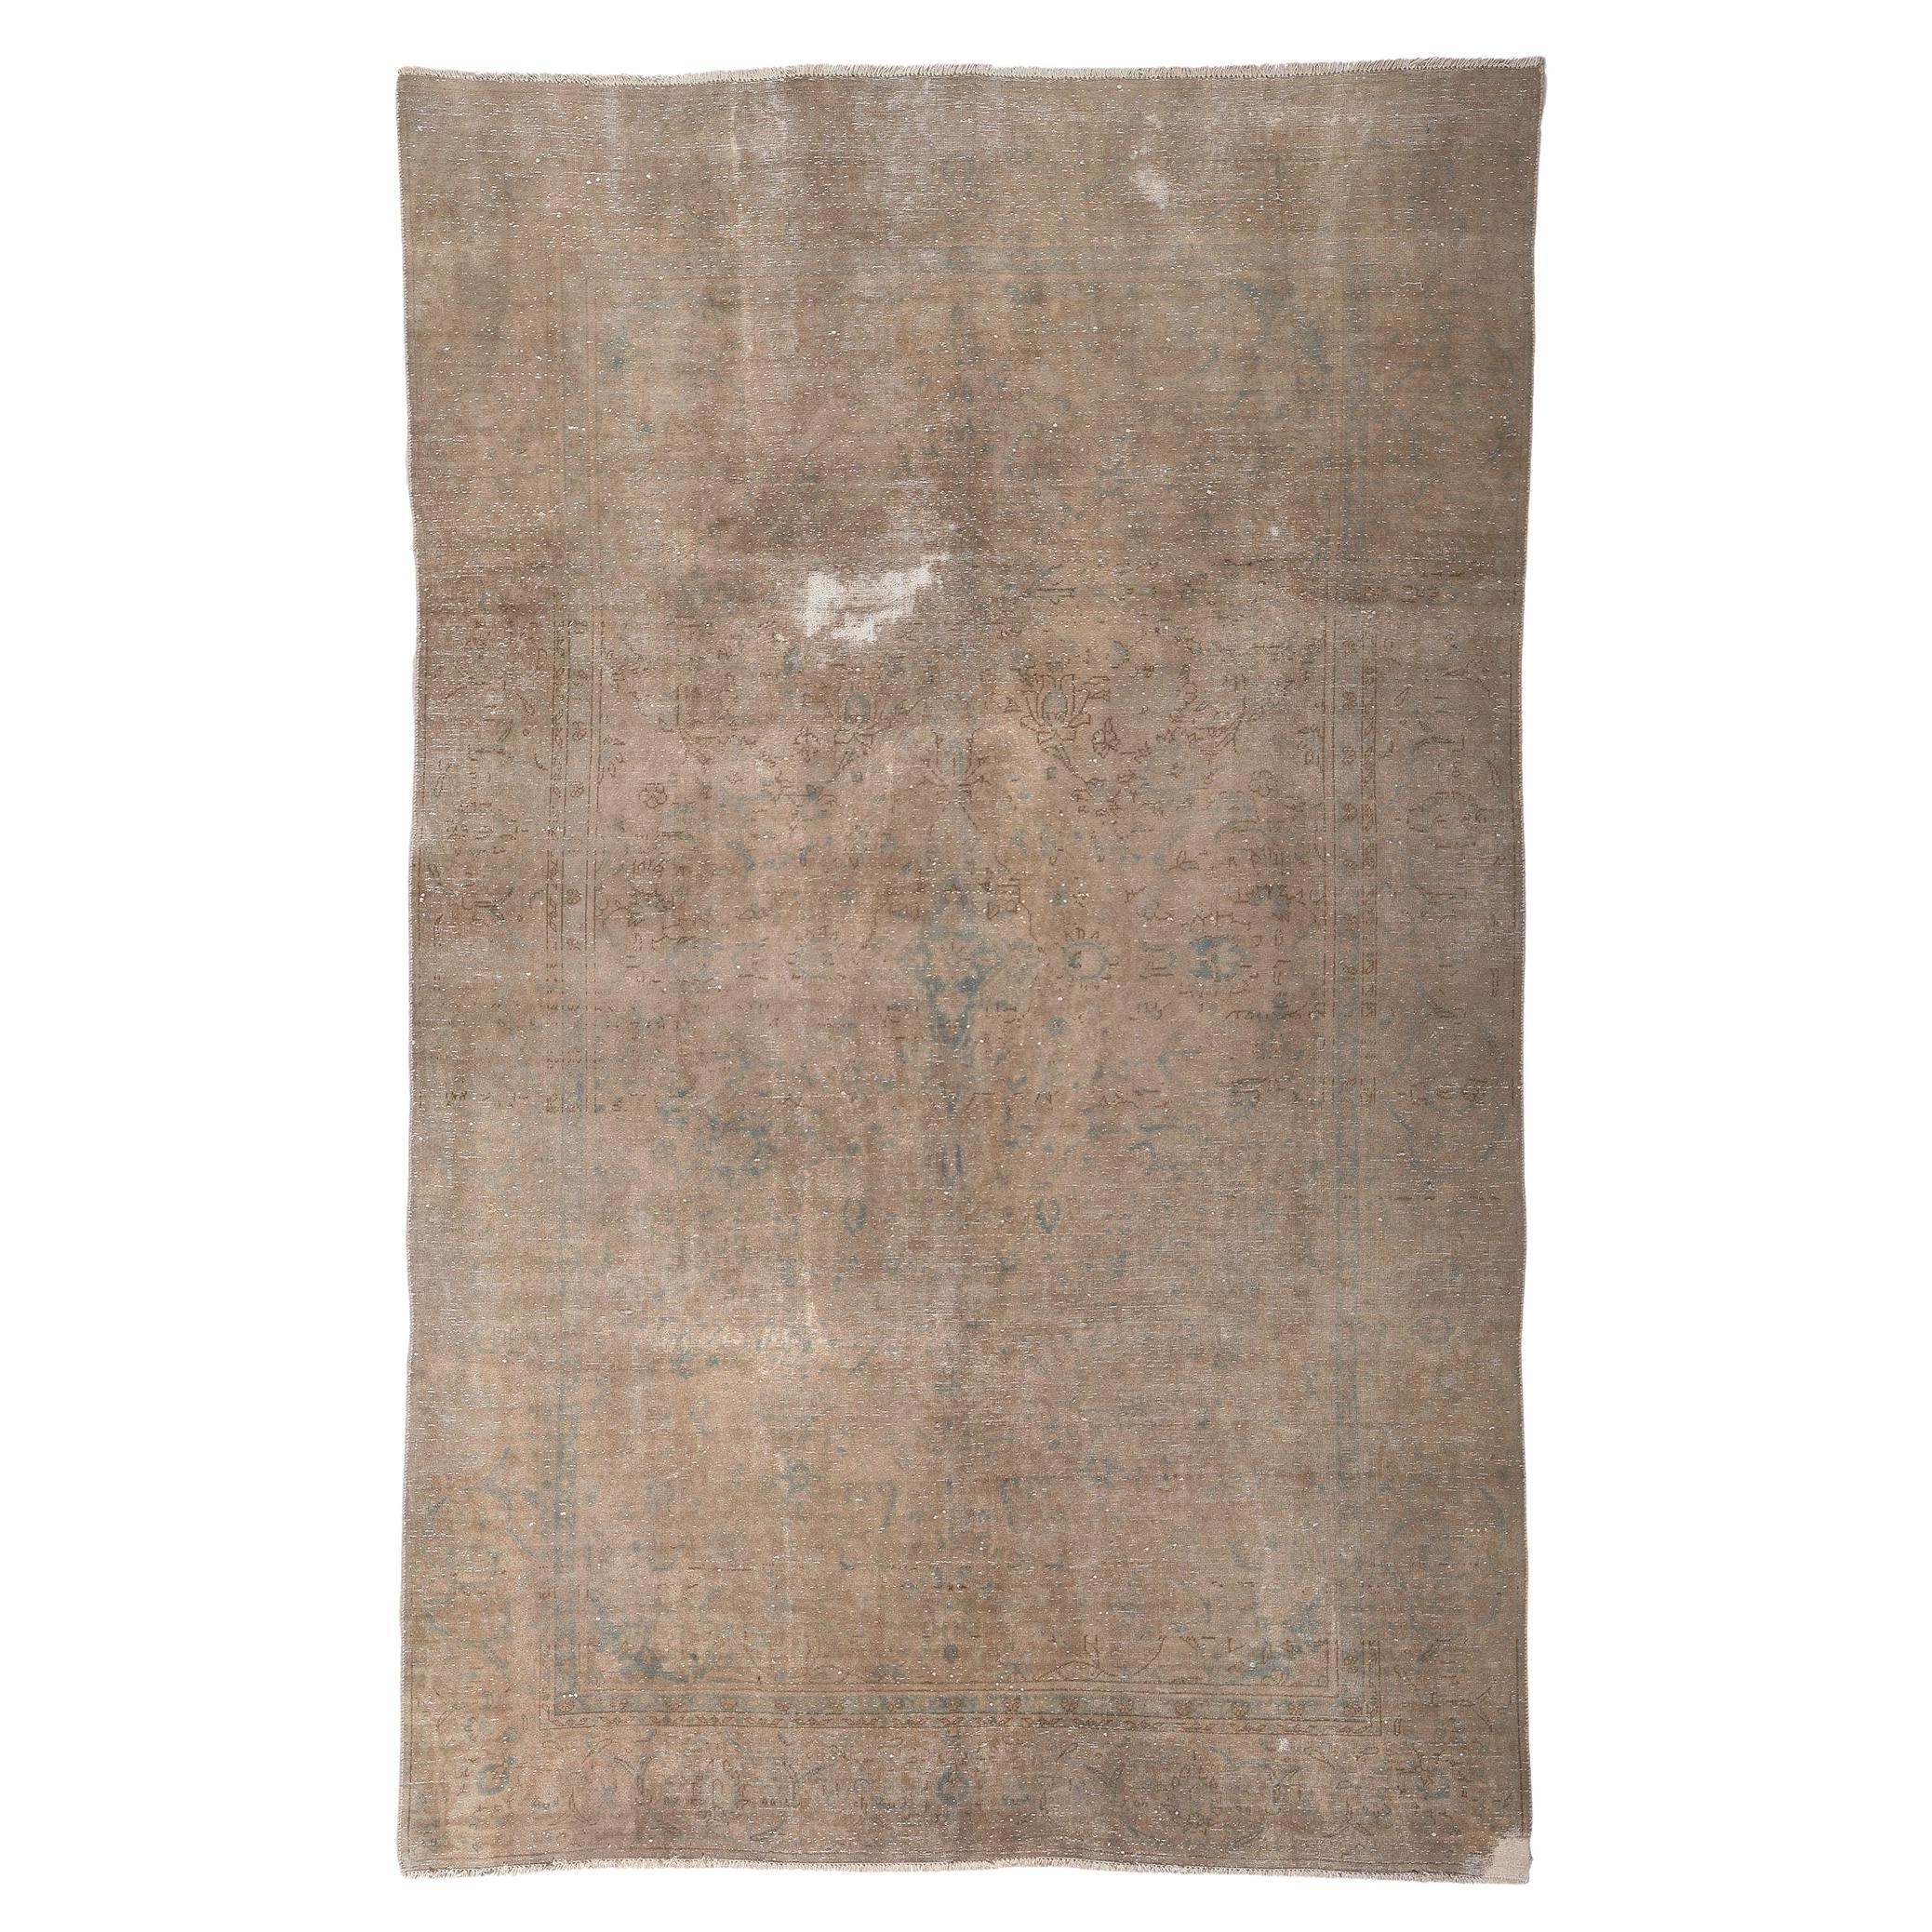 Distressed Faded Antique Persian Rug, Shabby Chic Luxe Meets Earth-Tone Elegance For Sale